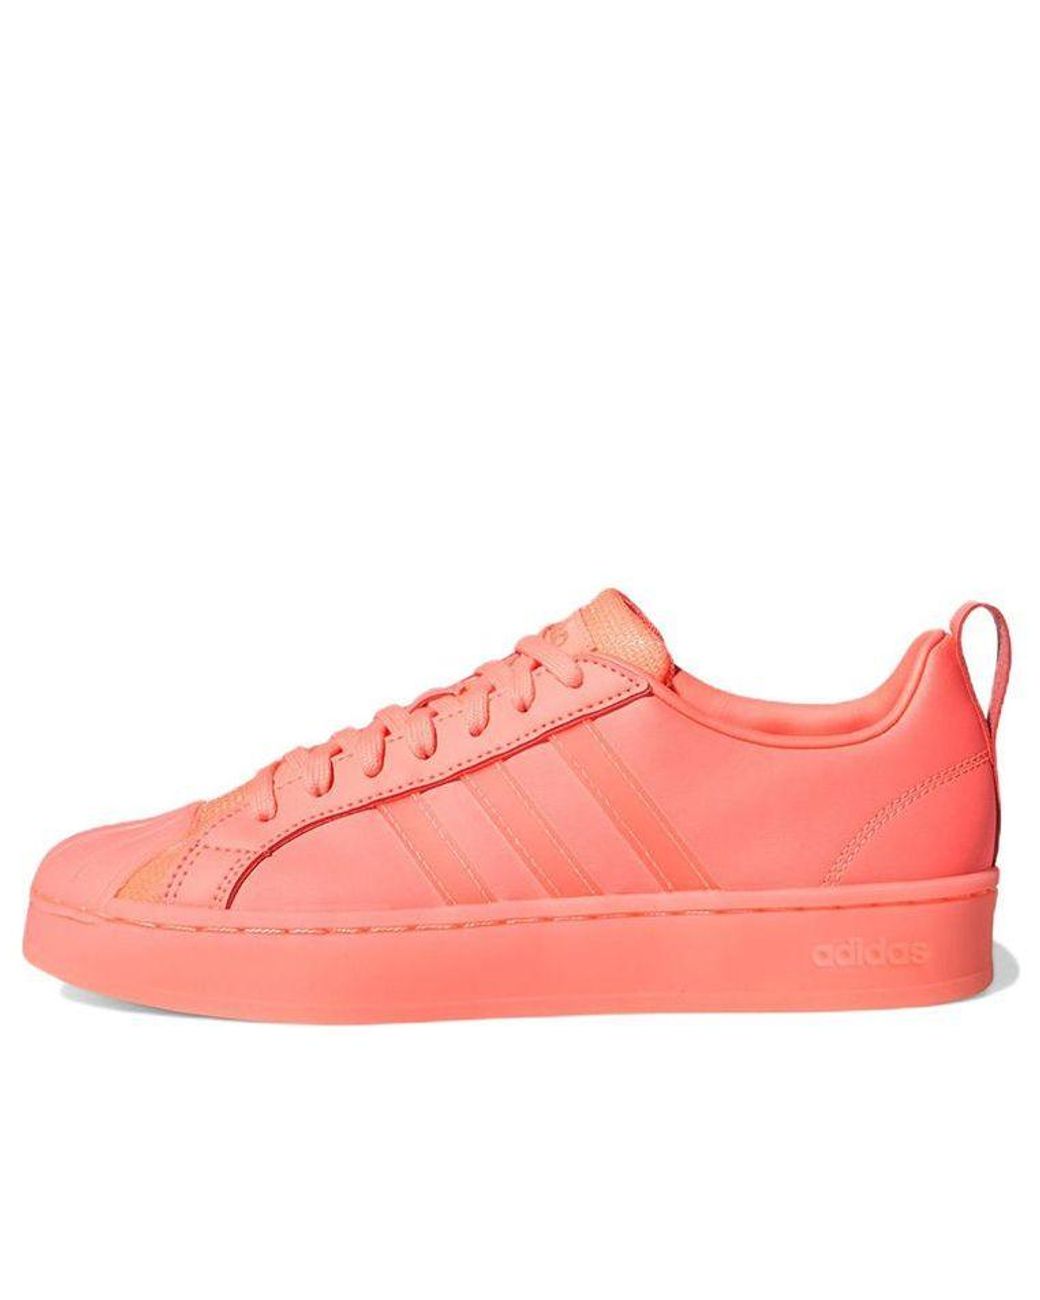 adidas Neo Streetcheck in Pink | Lyst